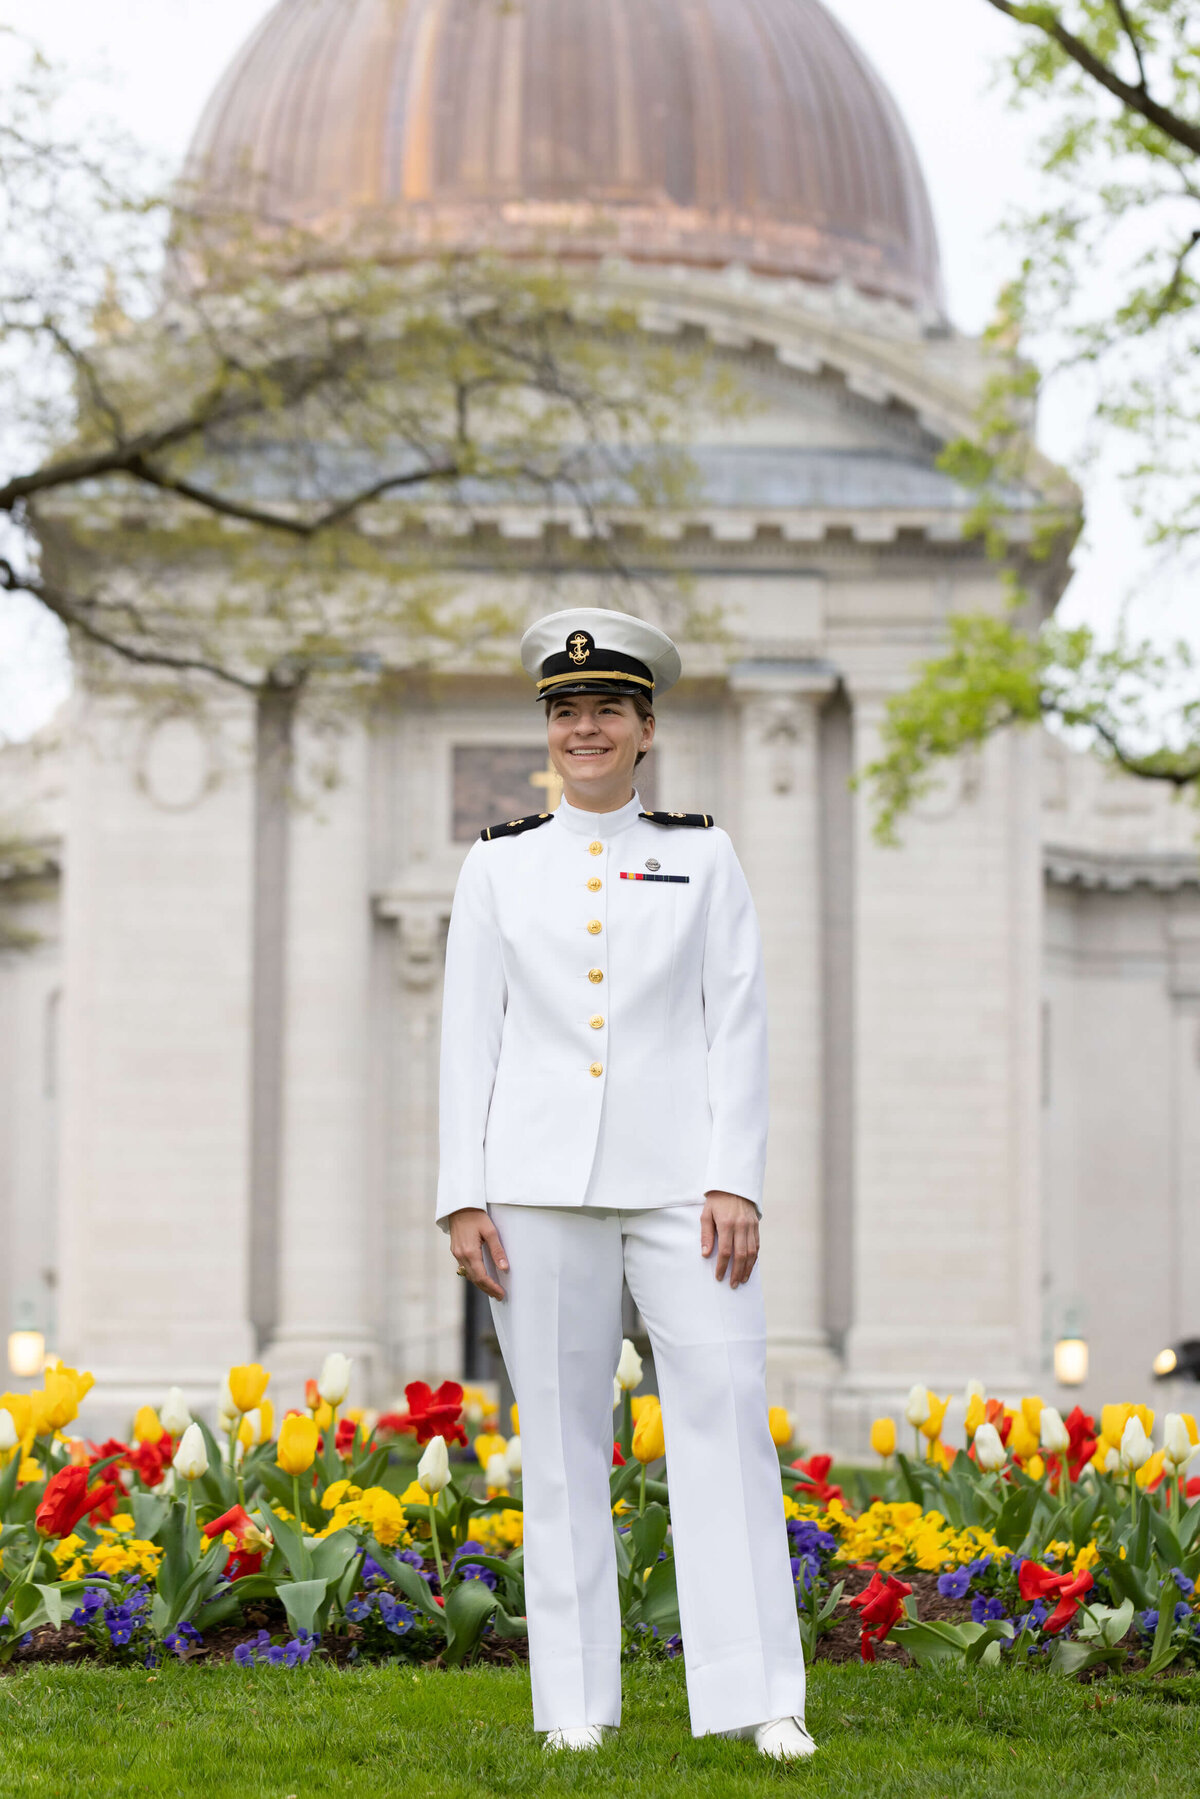 Naval Academy Chapel dome and tulips with graduate in choker whites uniform portrait.